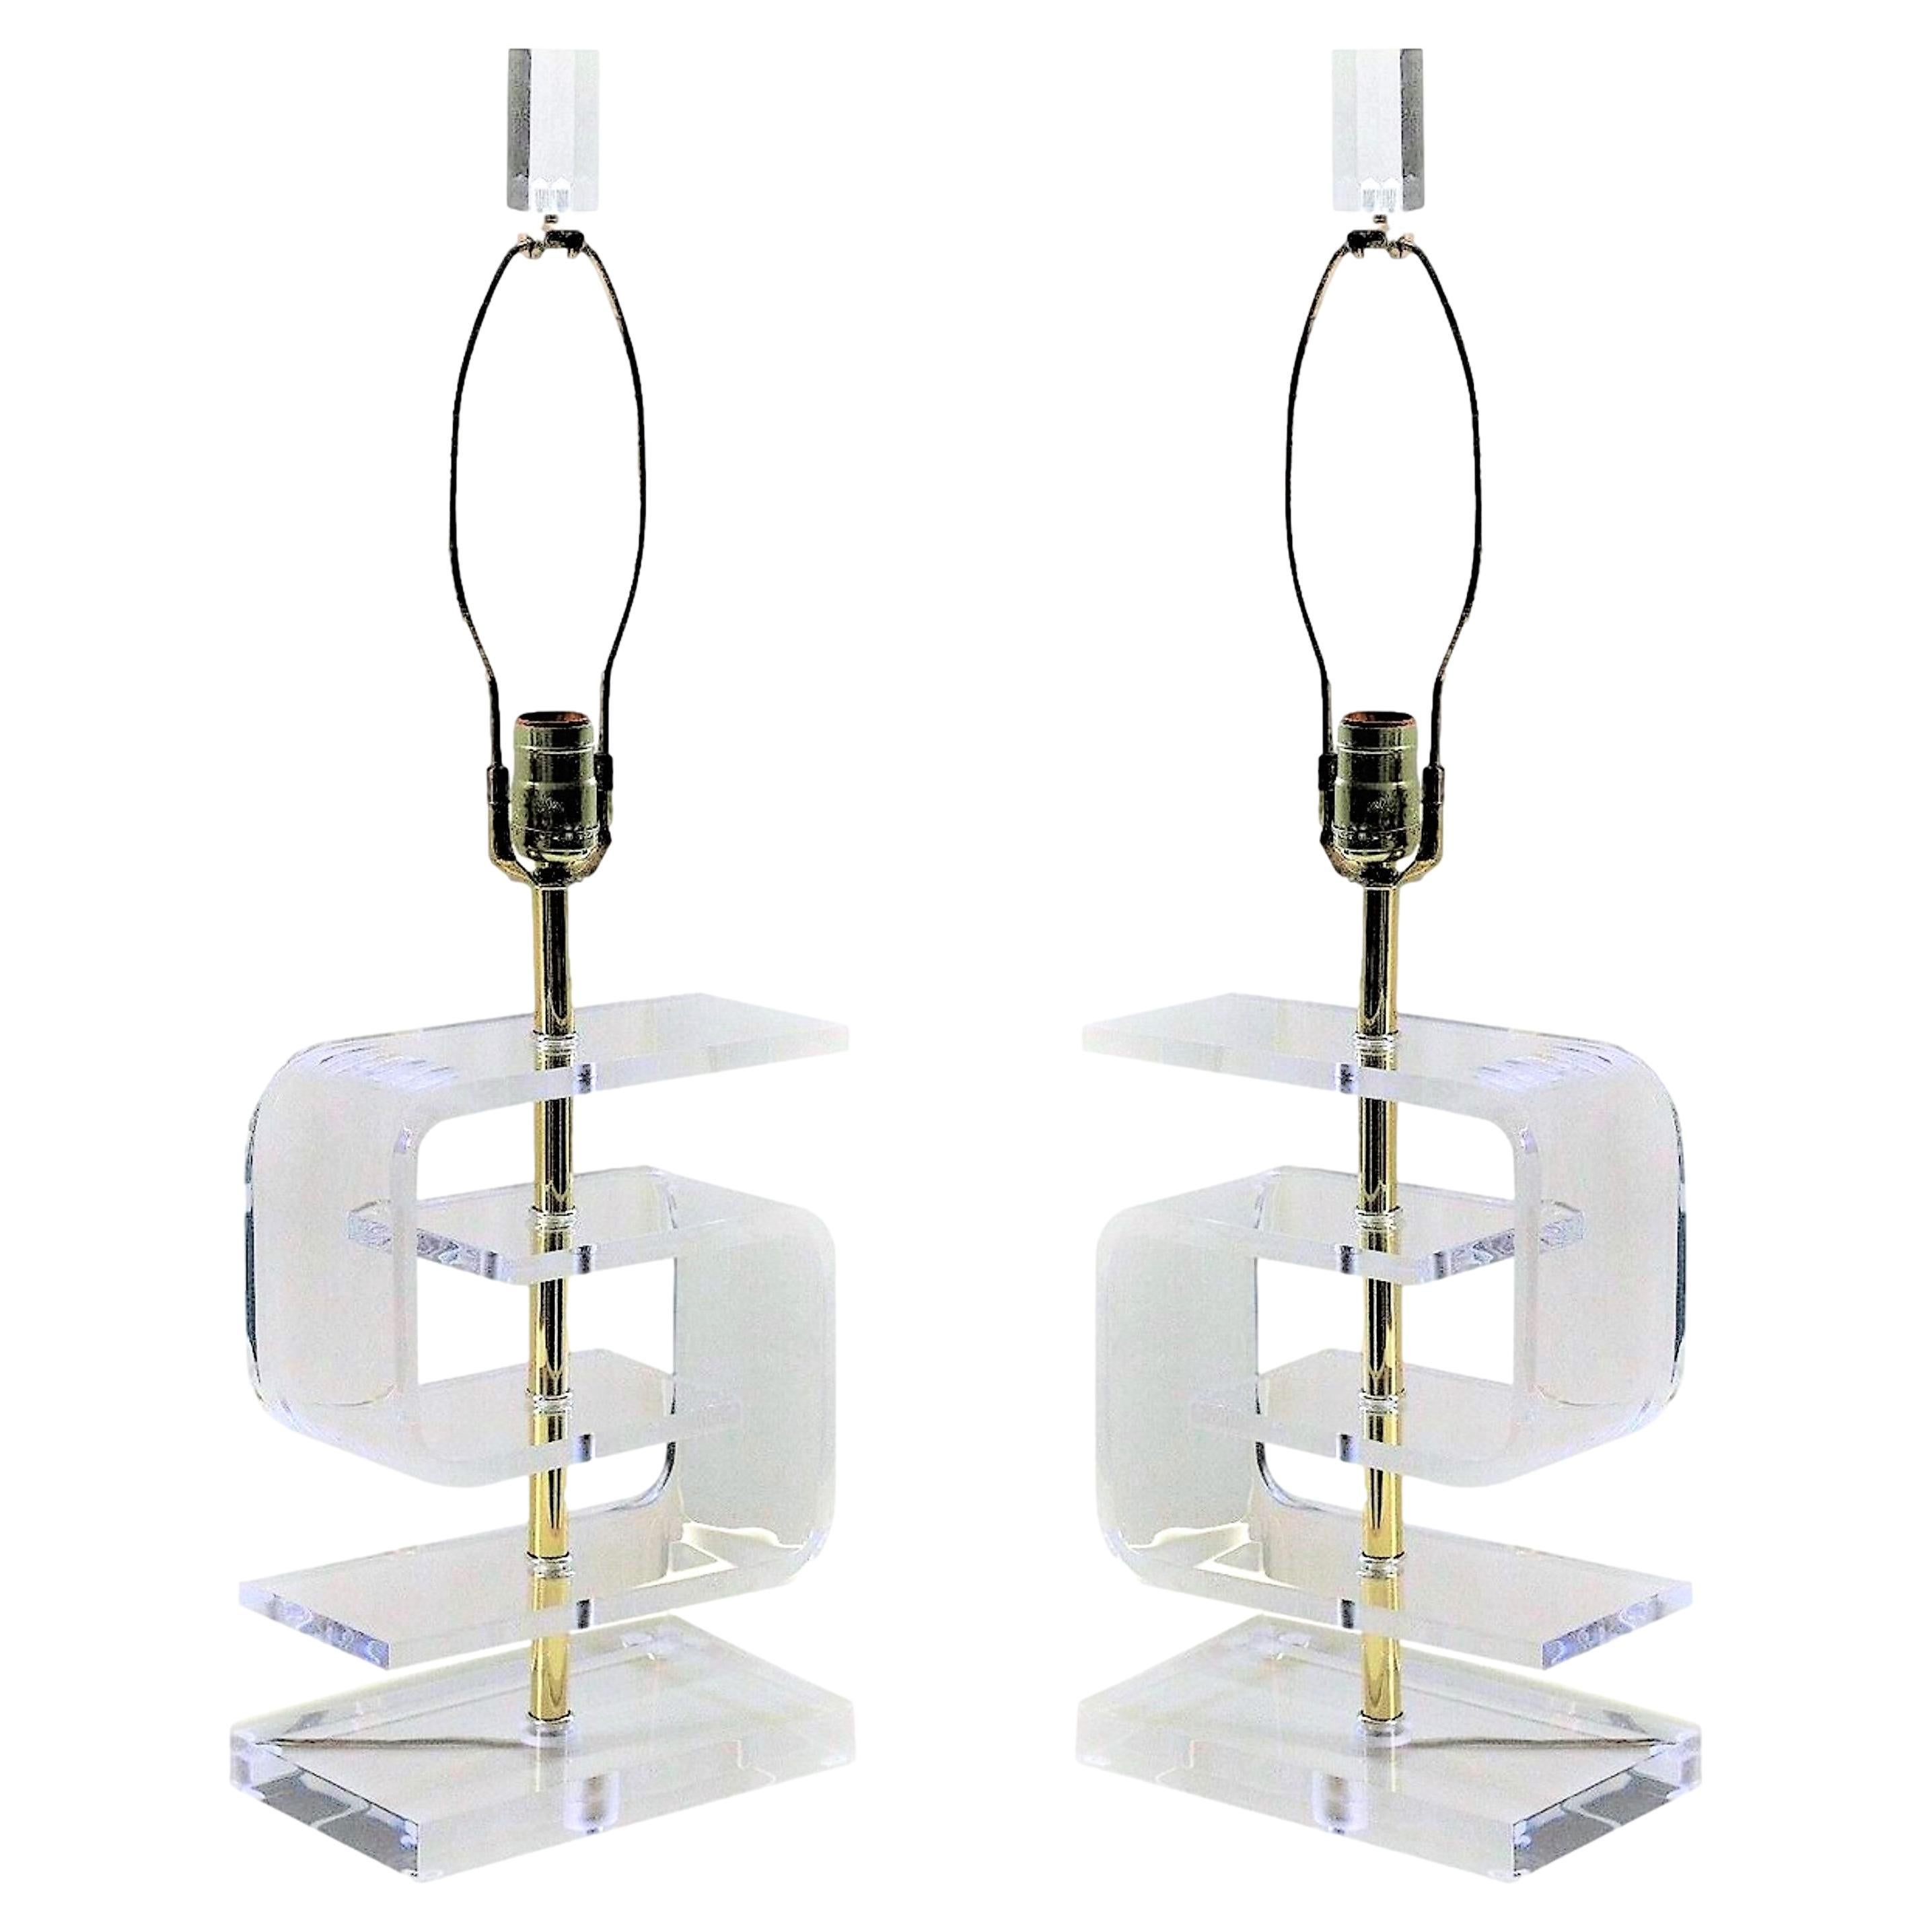 Pair of Vintage Greek Key Lucite Table Lamps in the Style of Les Prismatiques